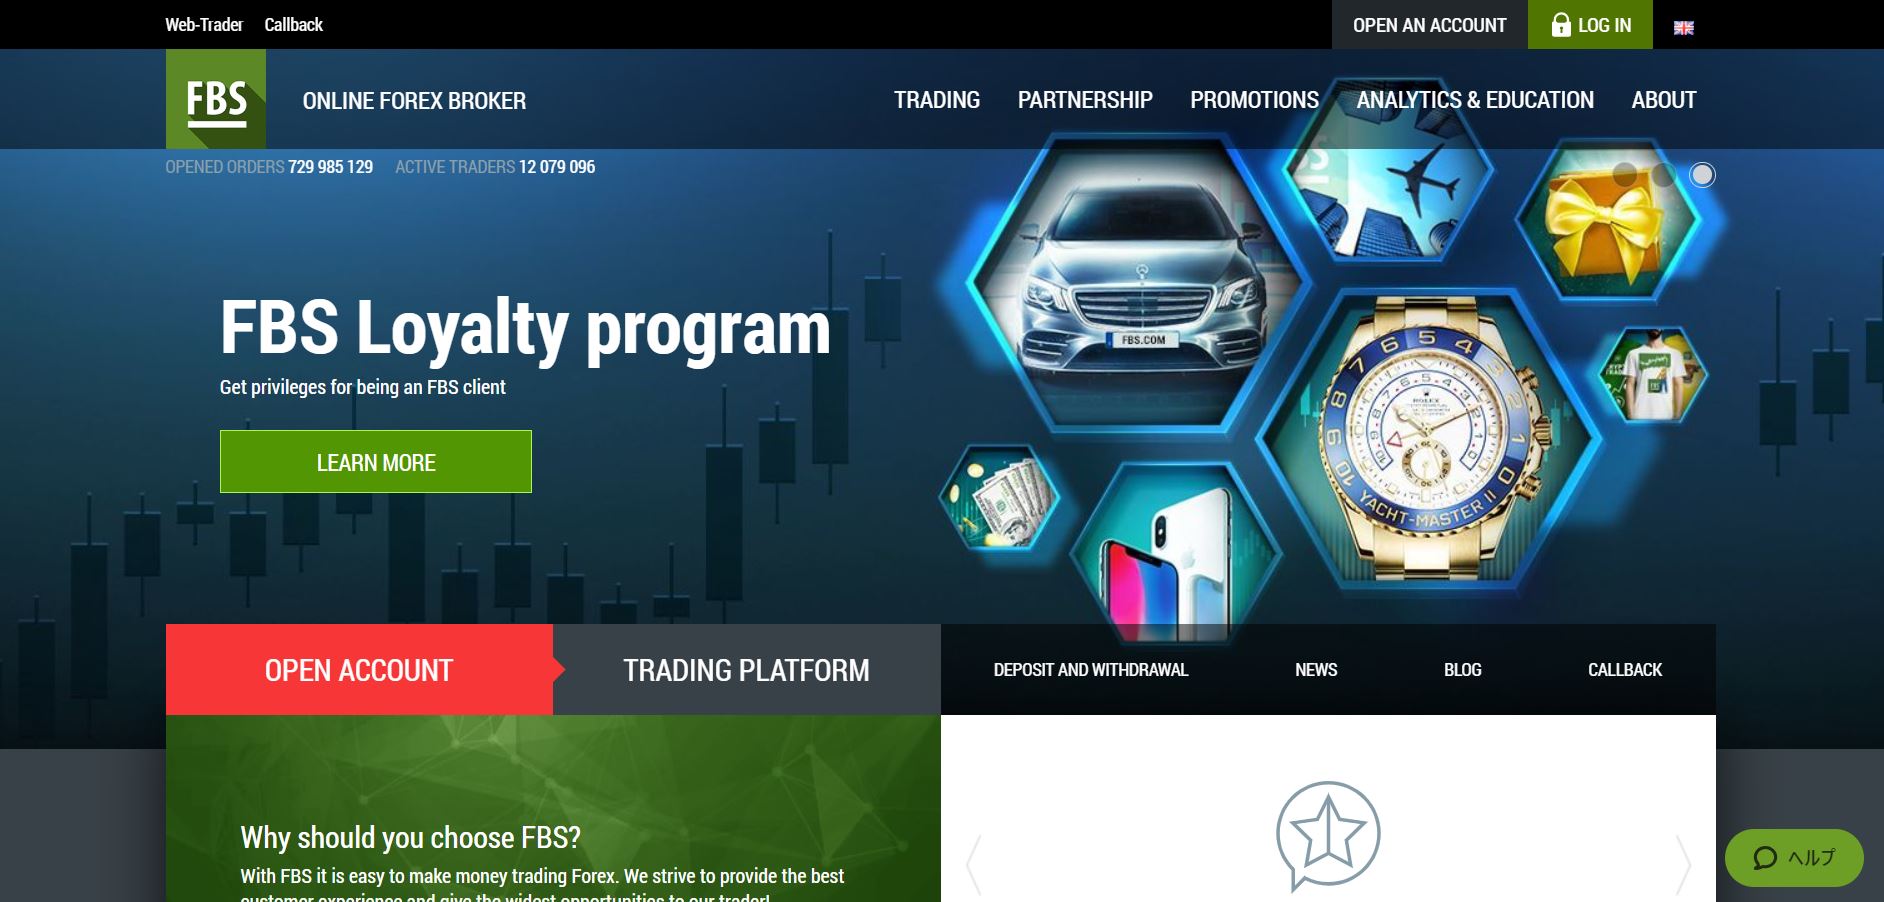 tutorial trading forex fbs